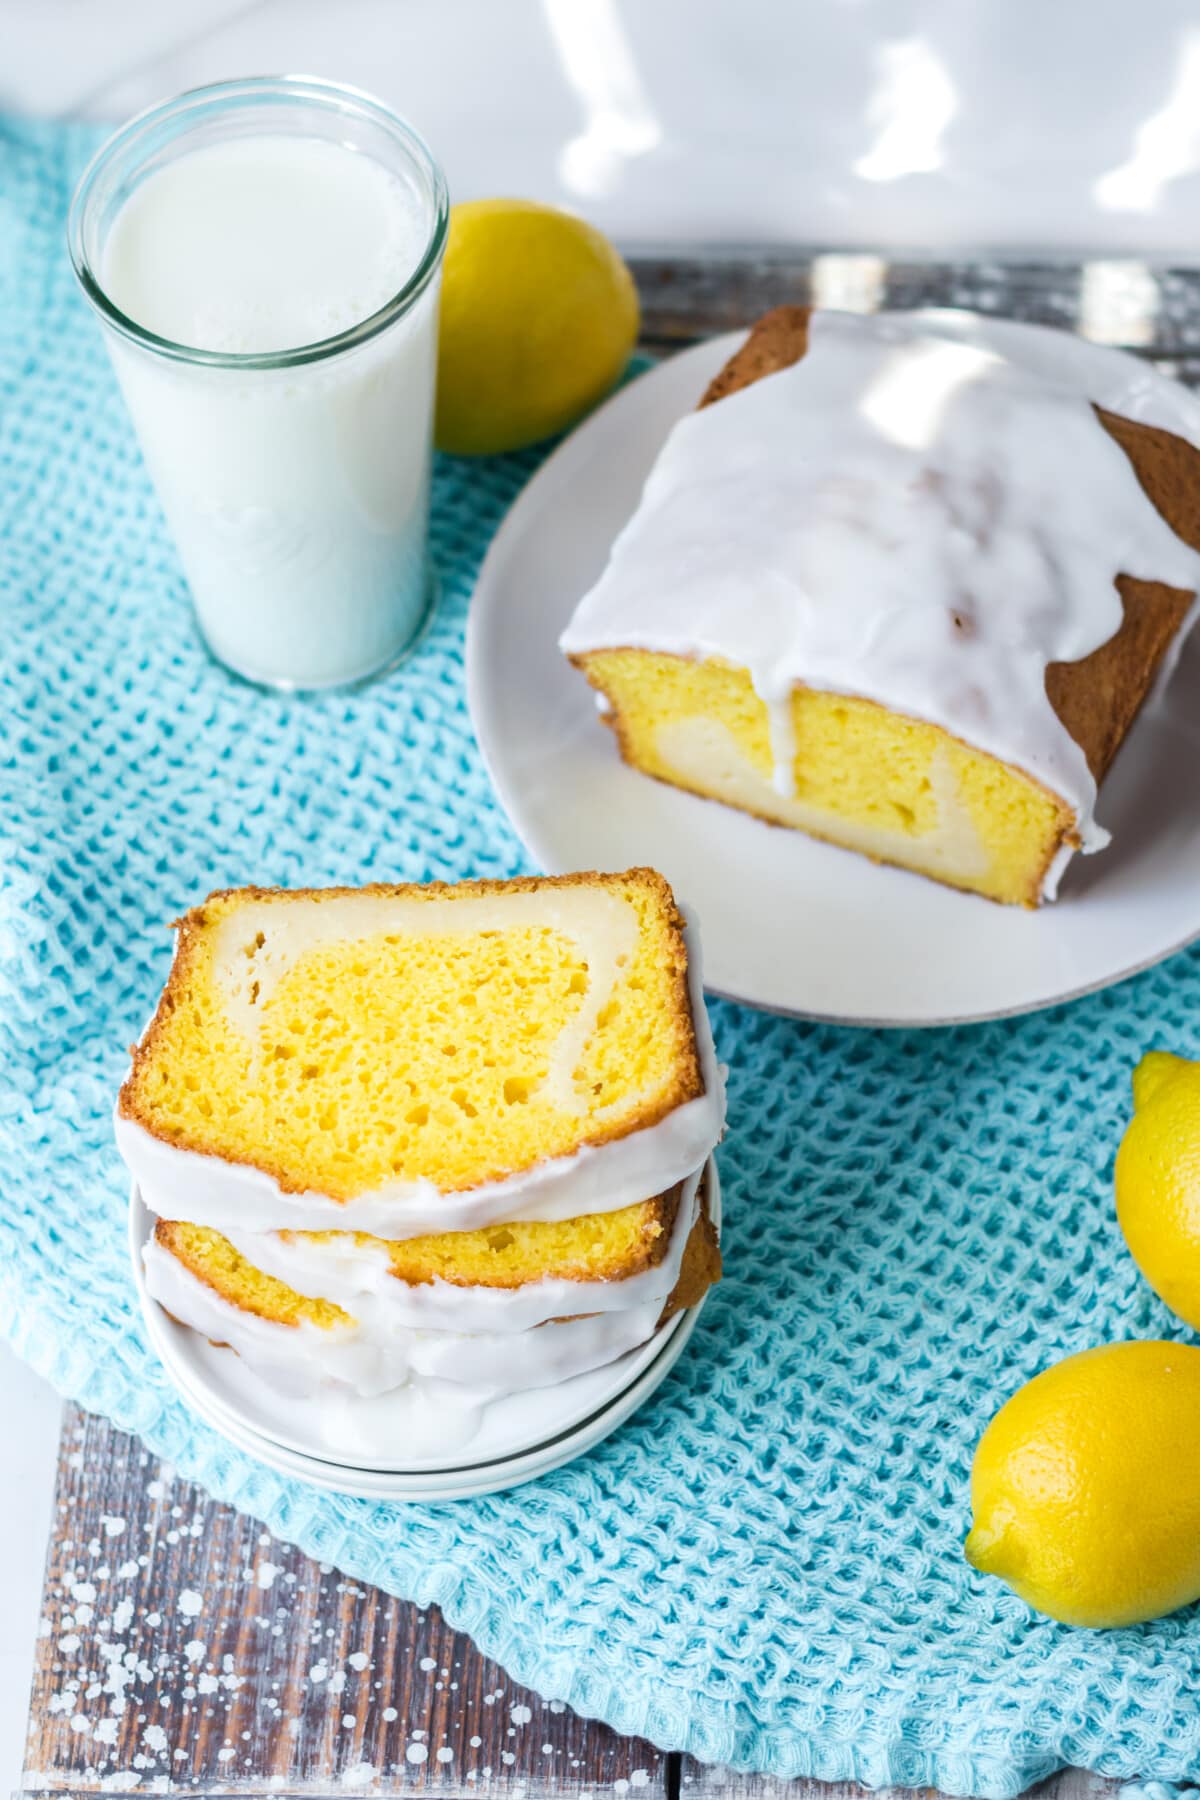 Slice of the Lemon Loaf with Cream Cheese.